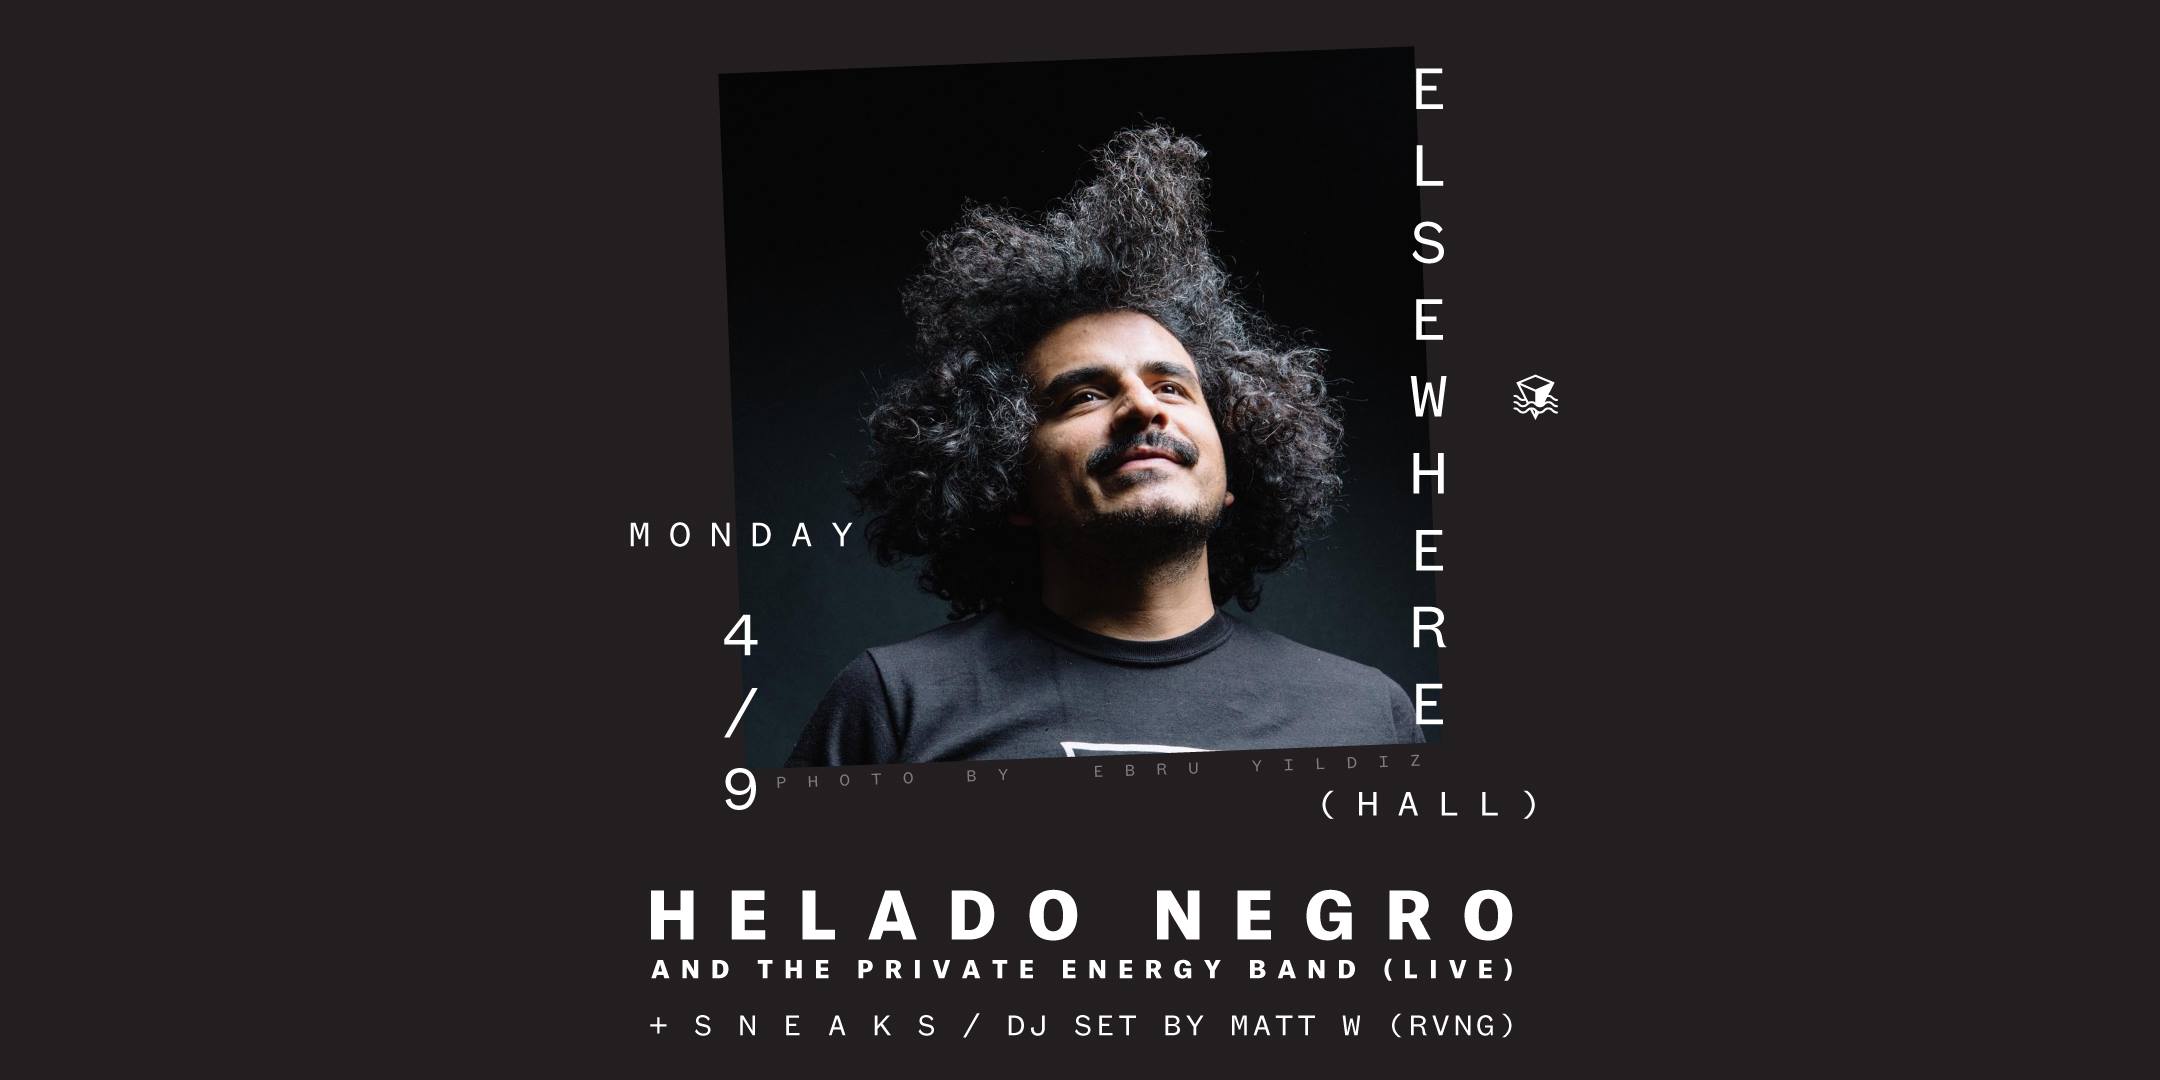 Helado Negro and the Private Energy Band